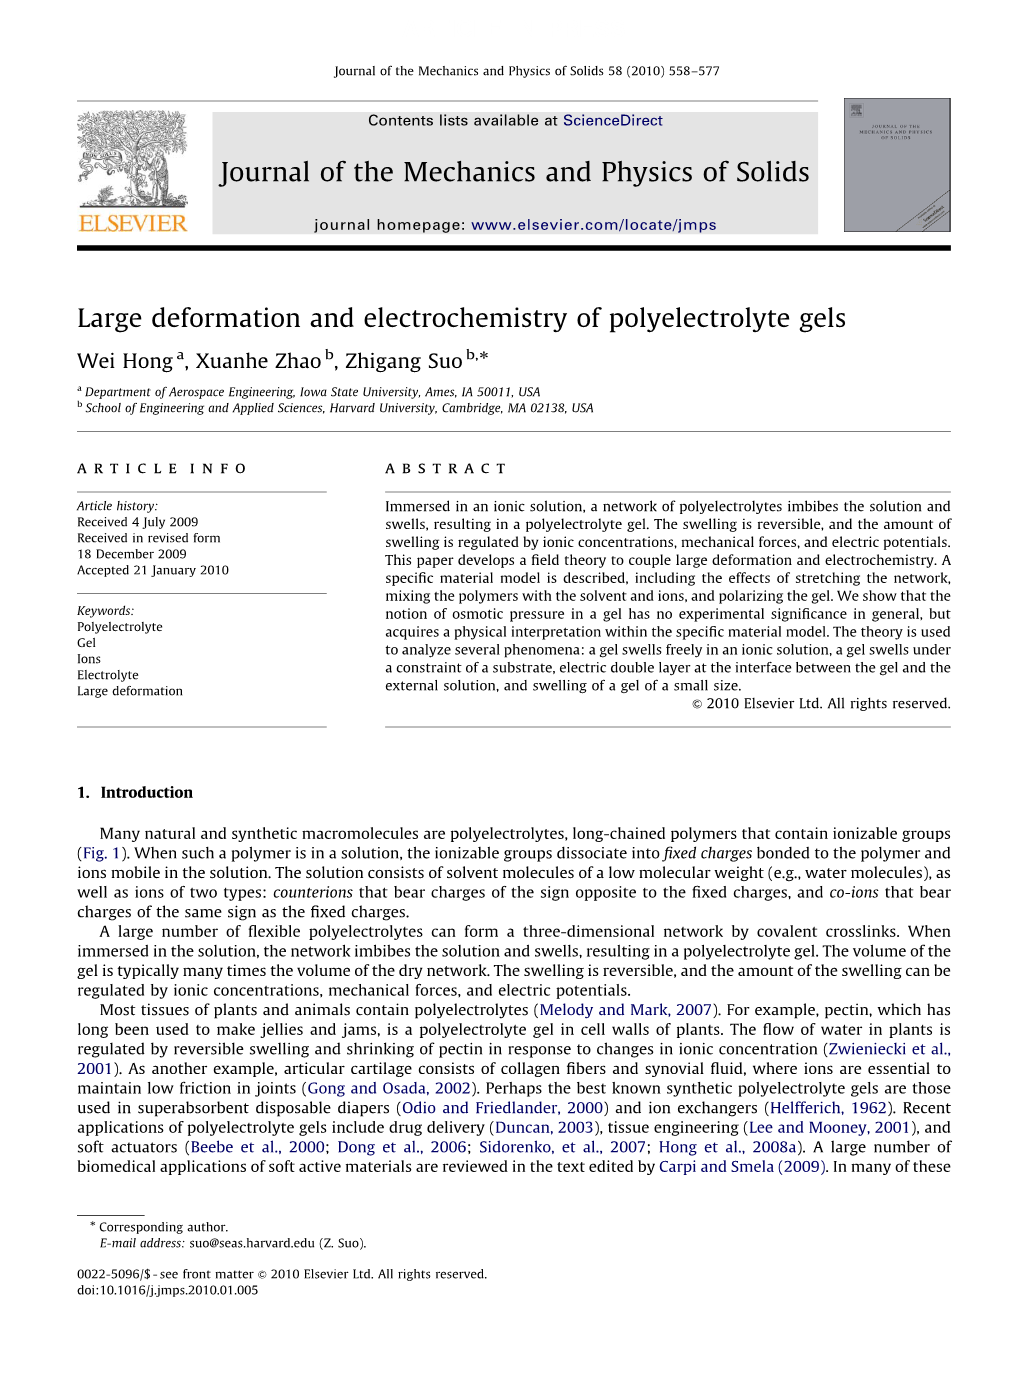 Large Deformation and Electrochemistry of Polyelectrolyte Gels